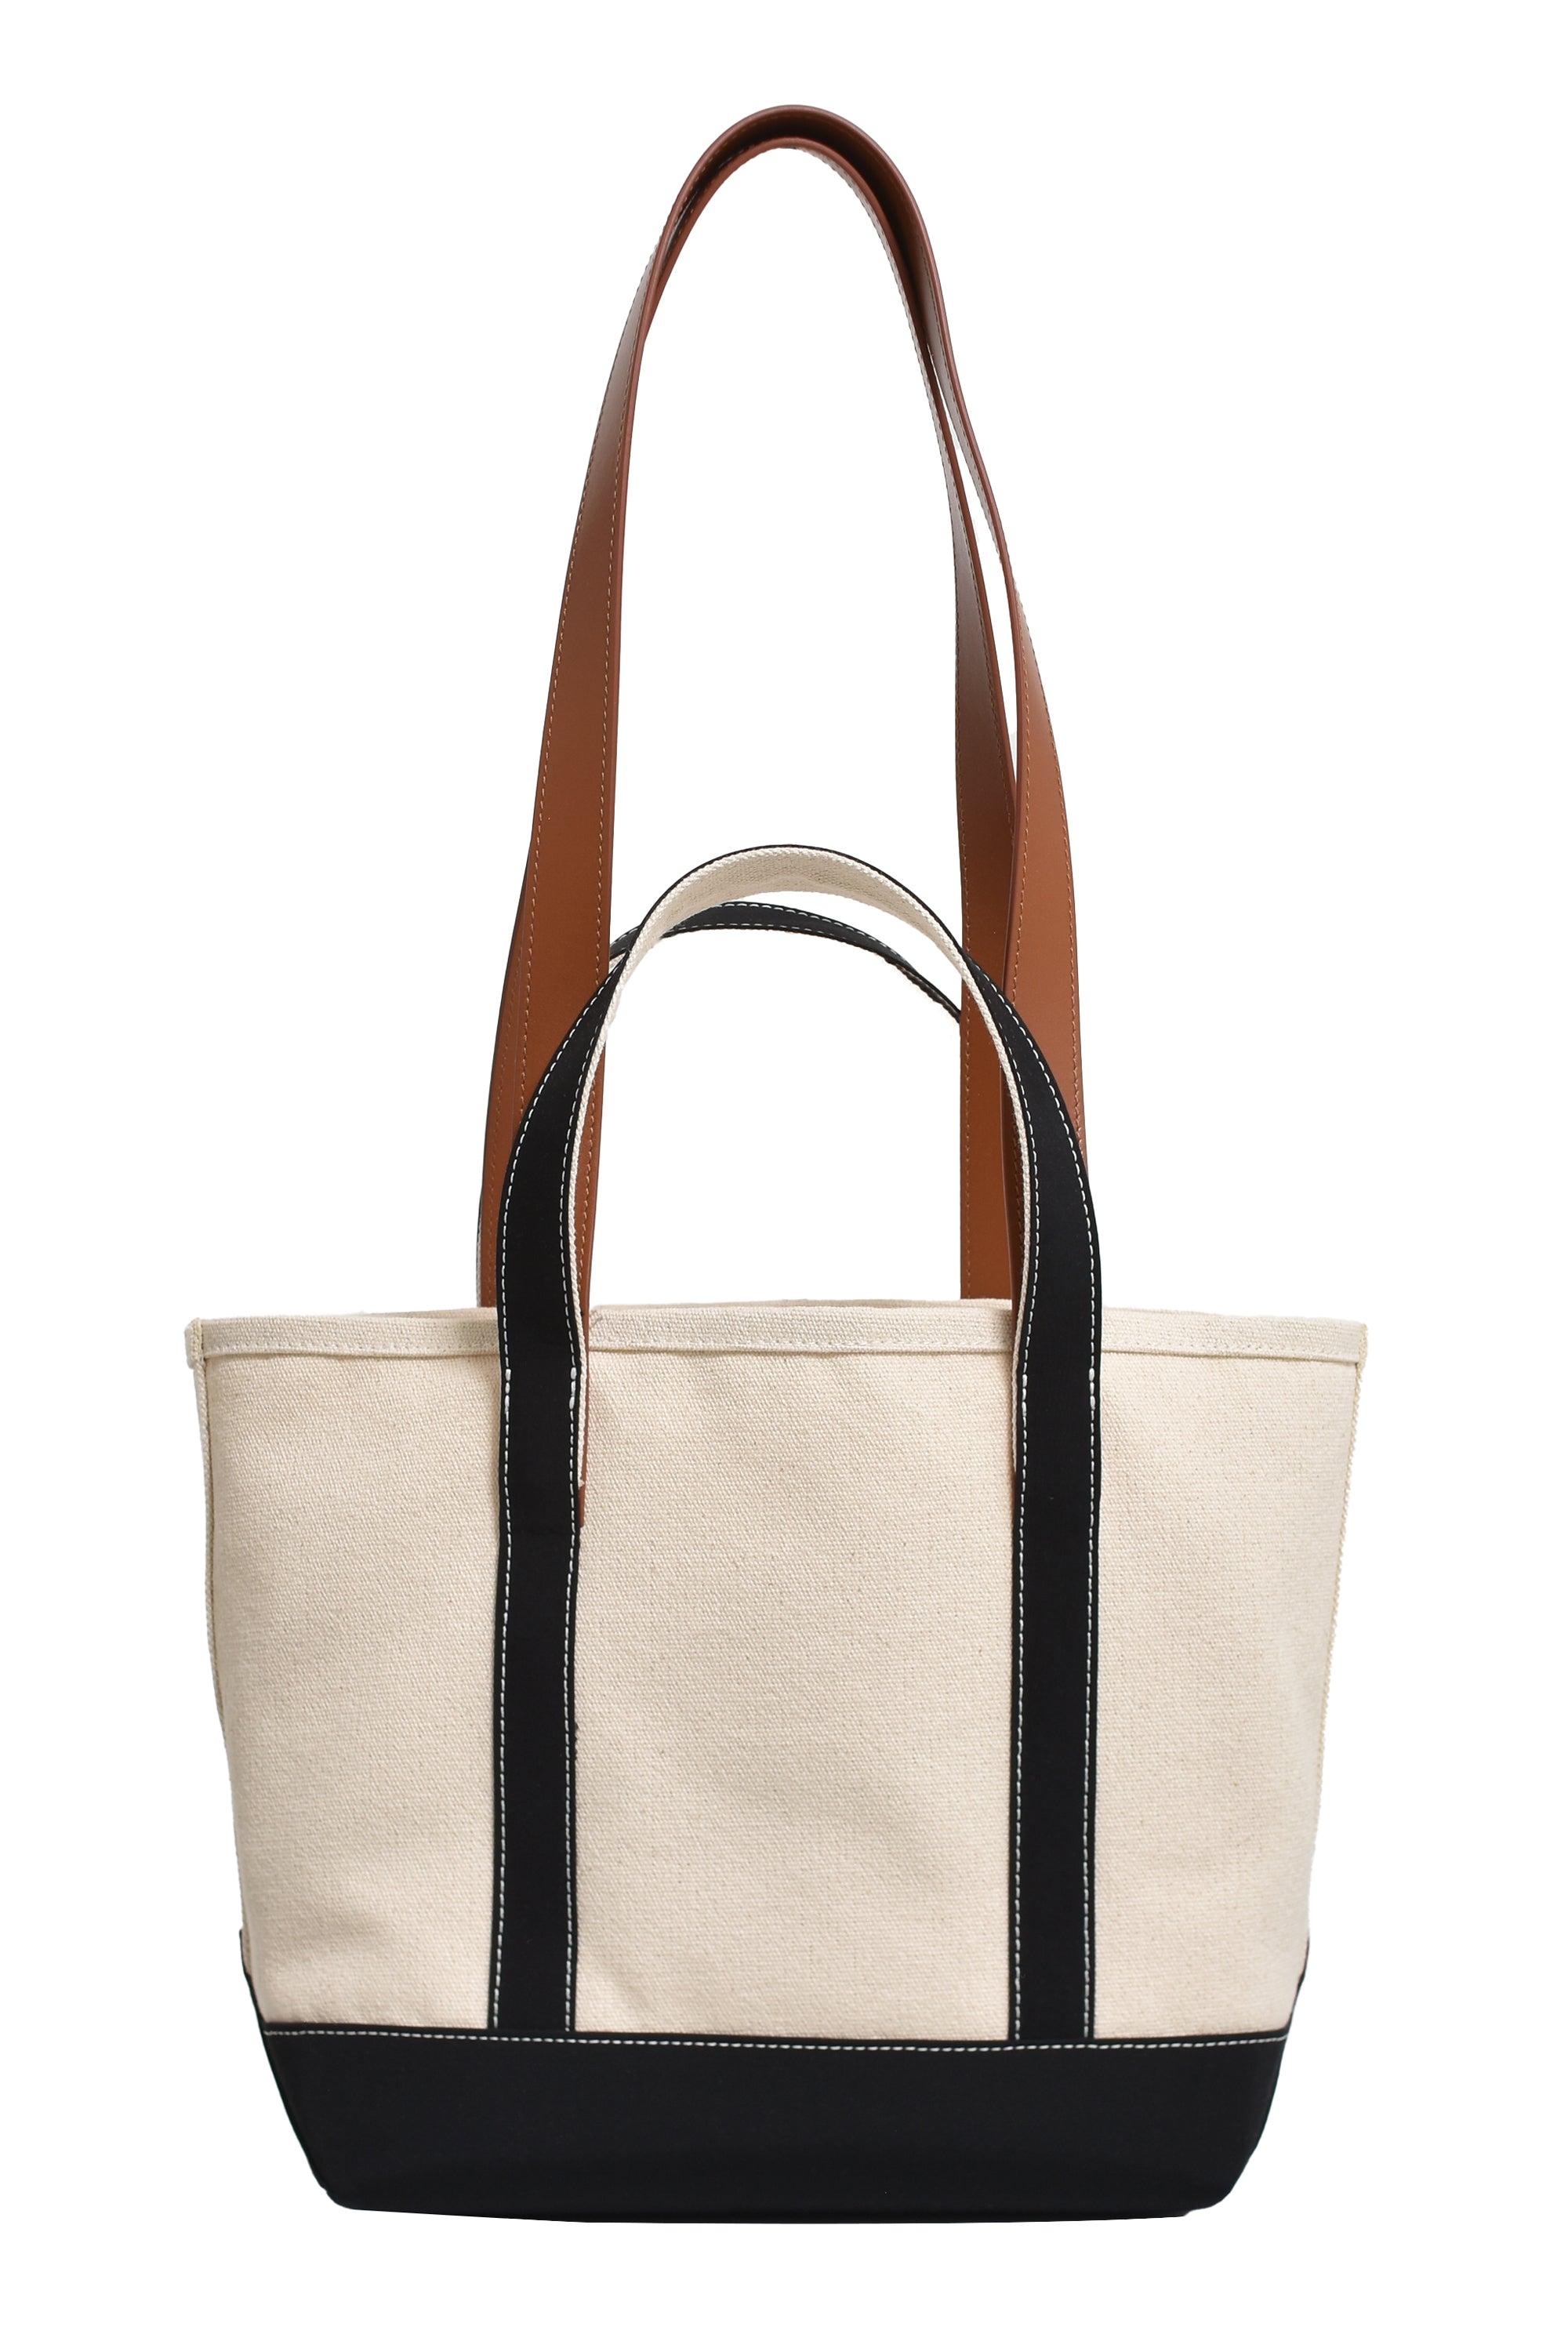 Palm Angels Logo Canvas Tote in Natural